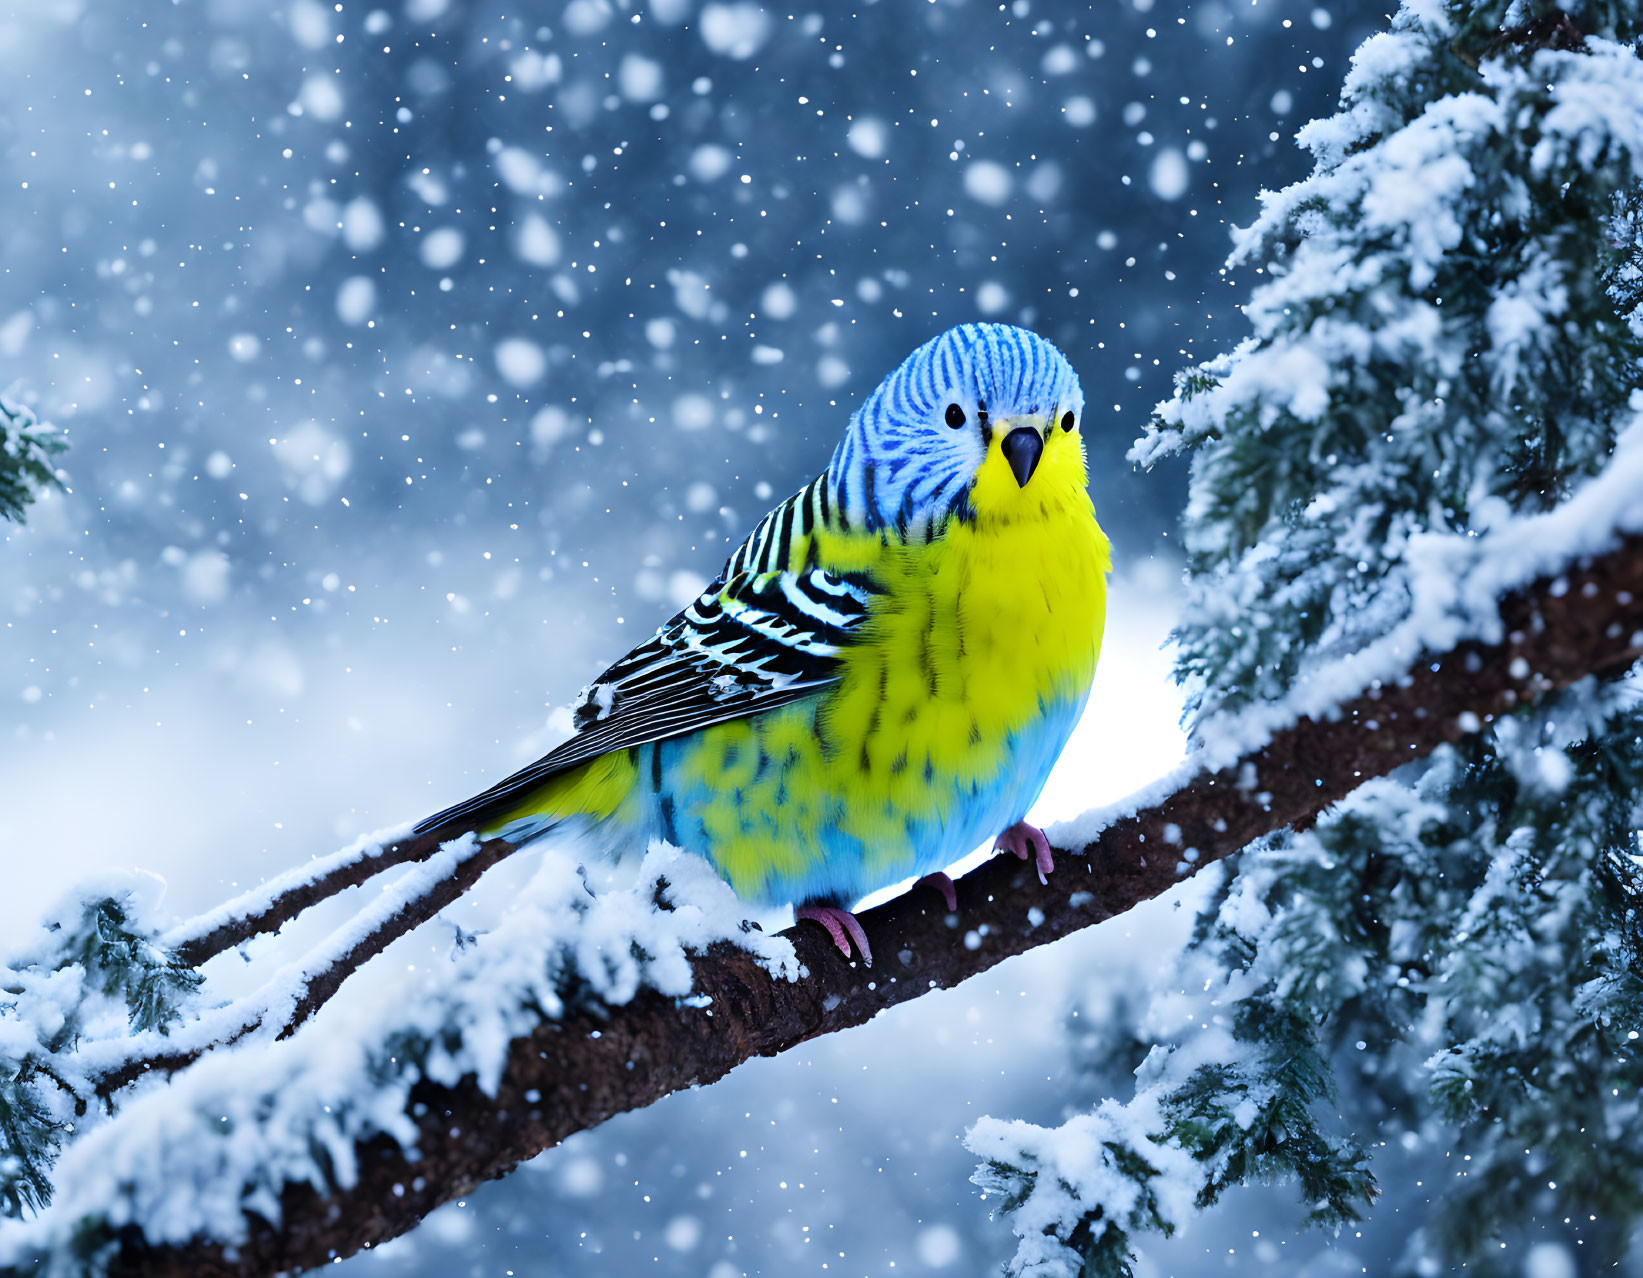 Colorful Budgie on Snowy Branch with Falling Snowflakes